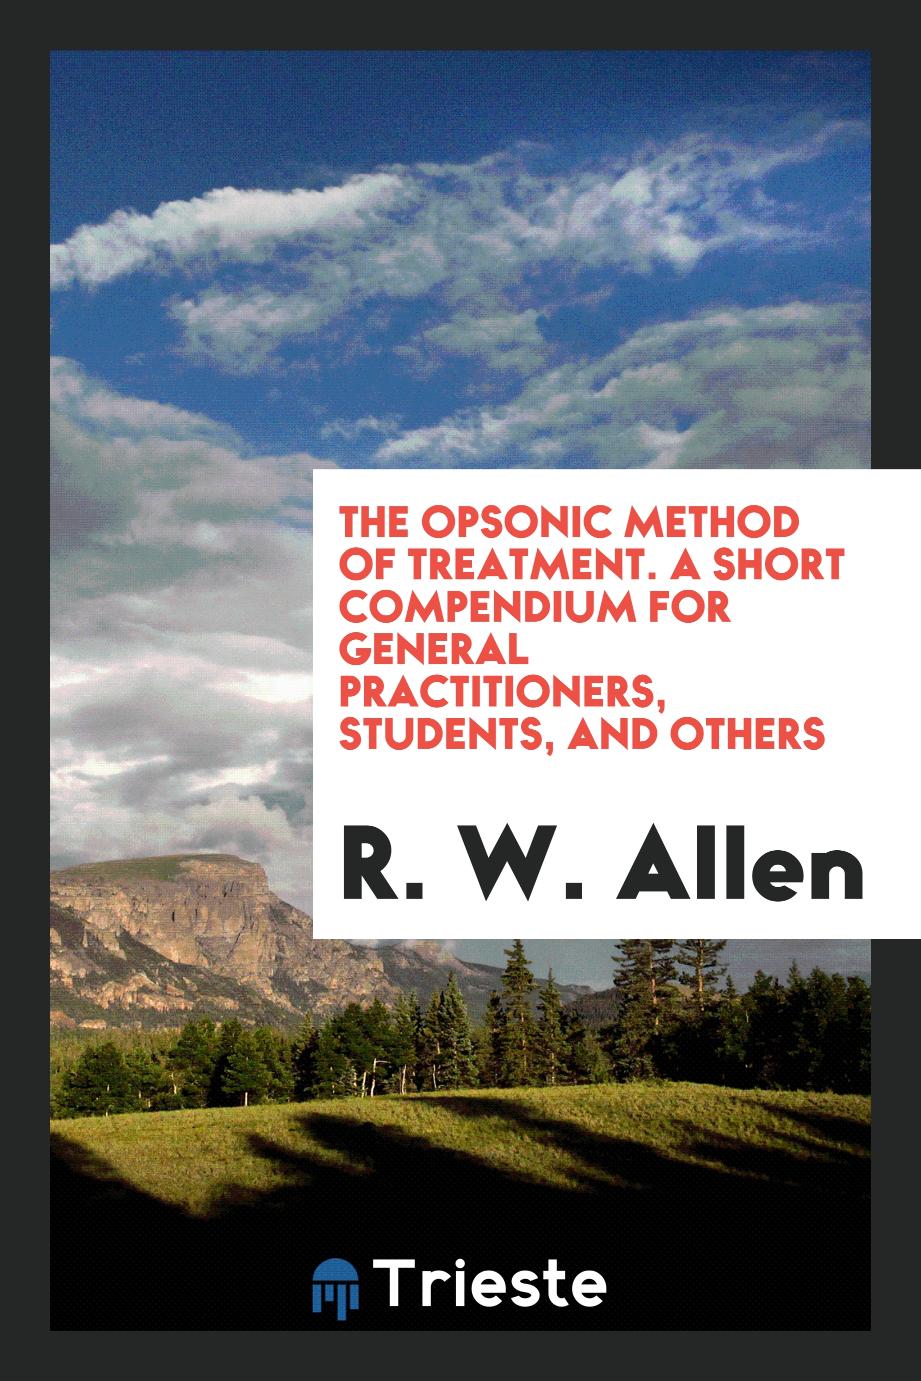 The Opsonic Method of Treatment. A Short Compendium for General Practitioners, Students, and Others